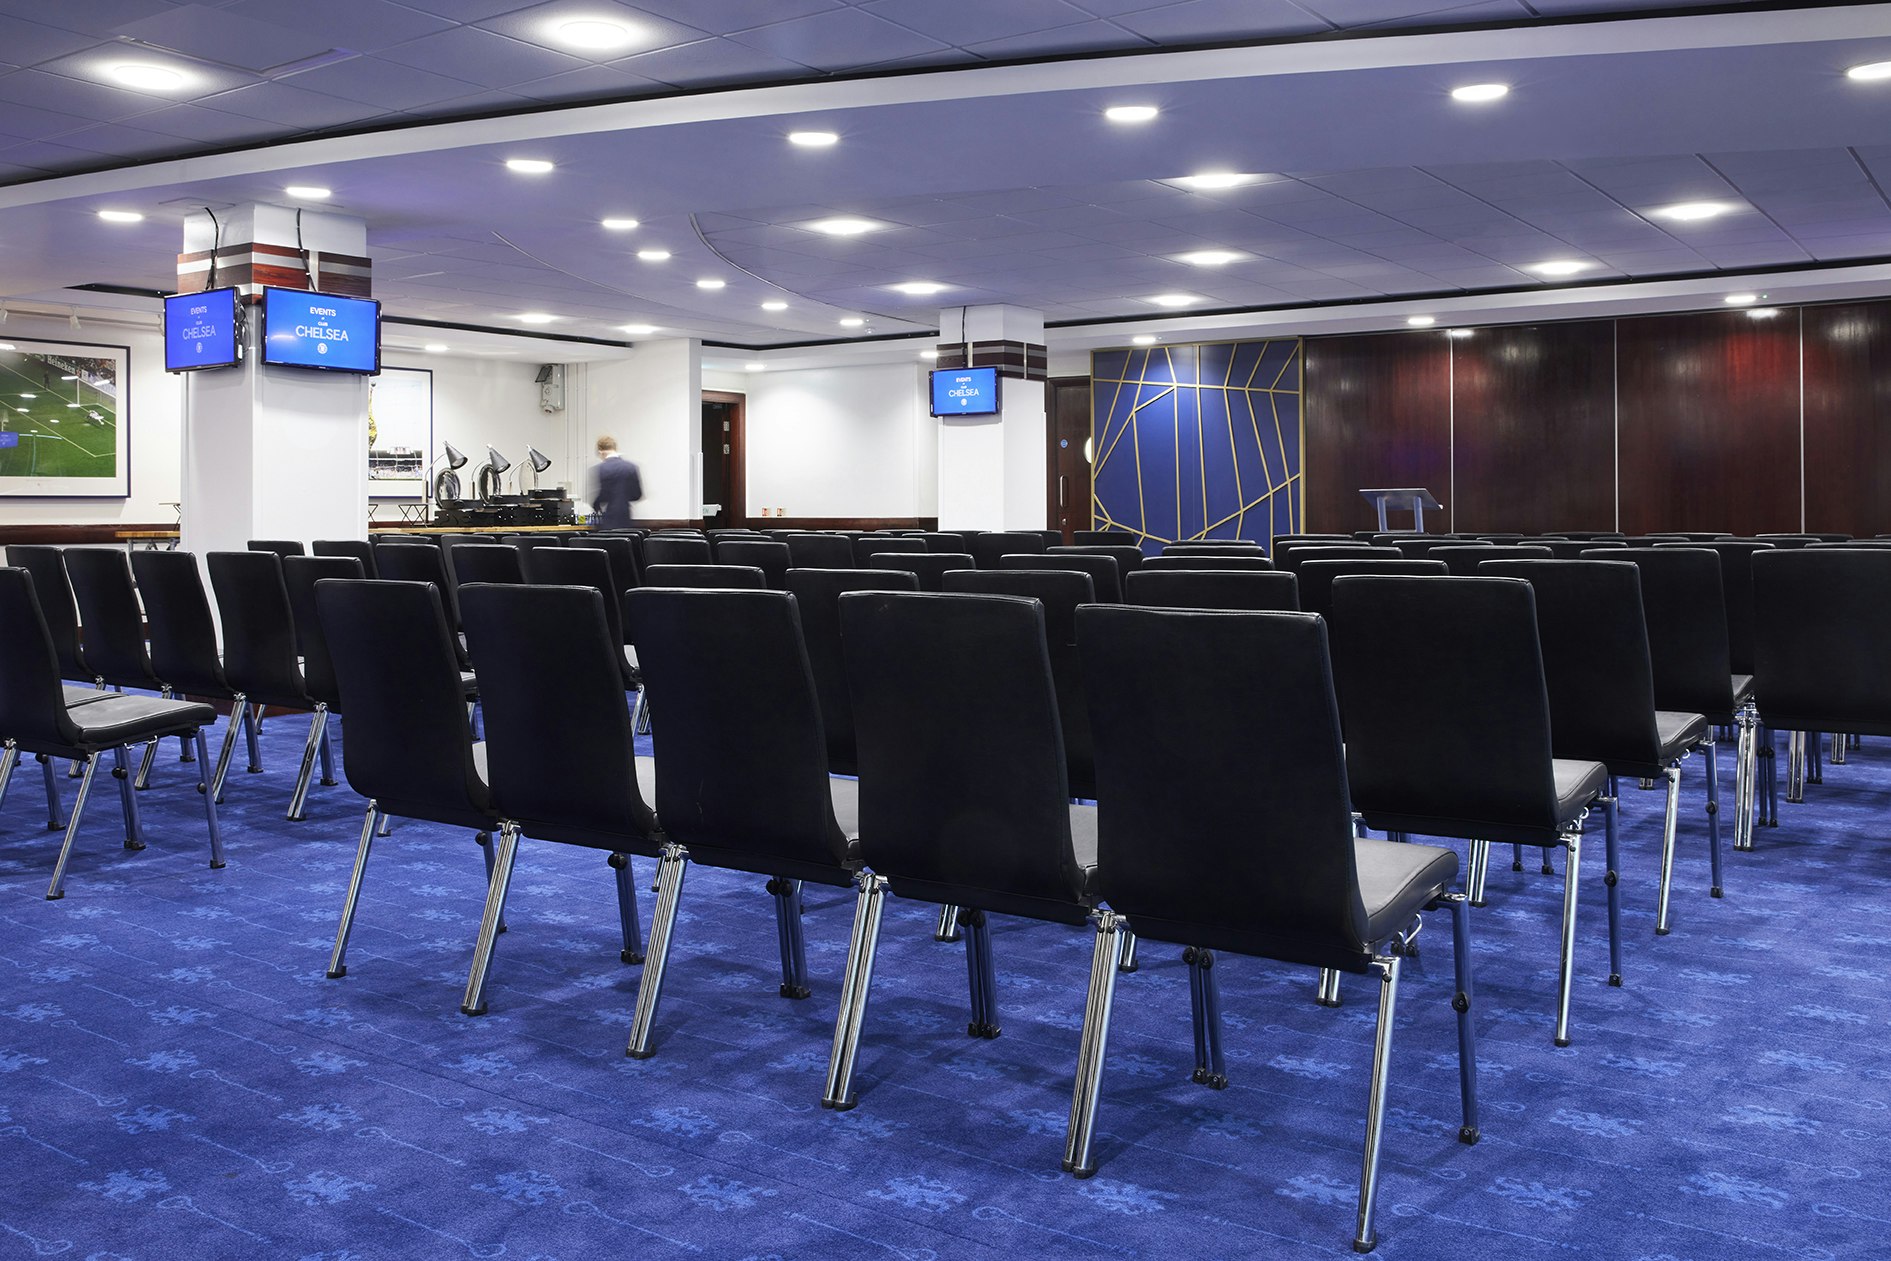 Chelsea Football Club - Bonnetti Suite and Clarke Suite image 4